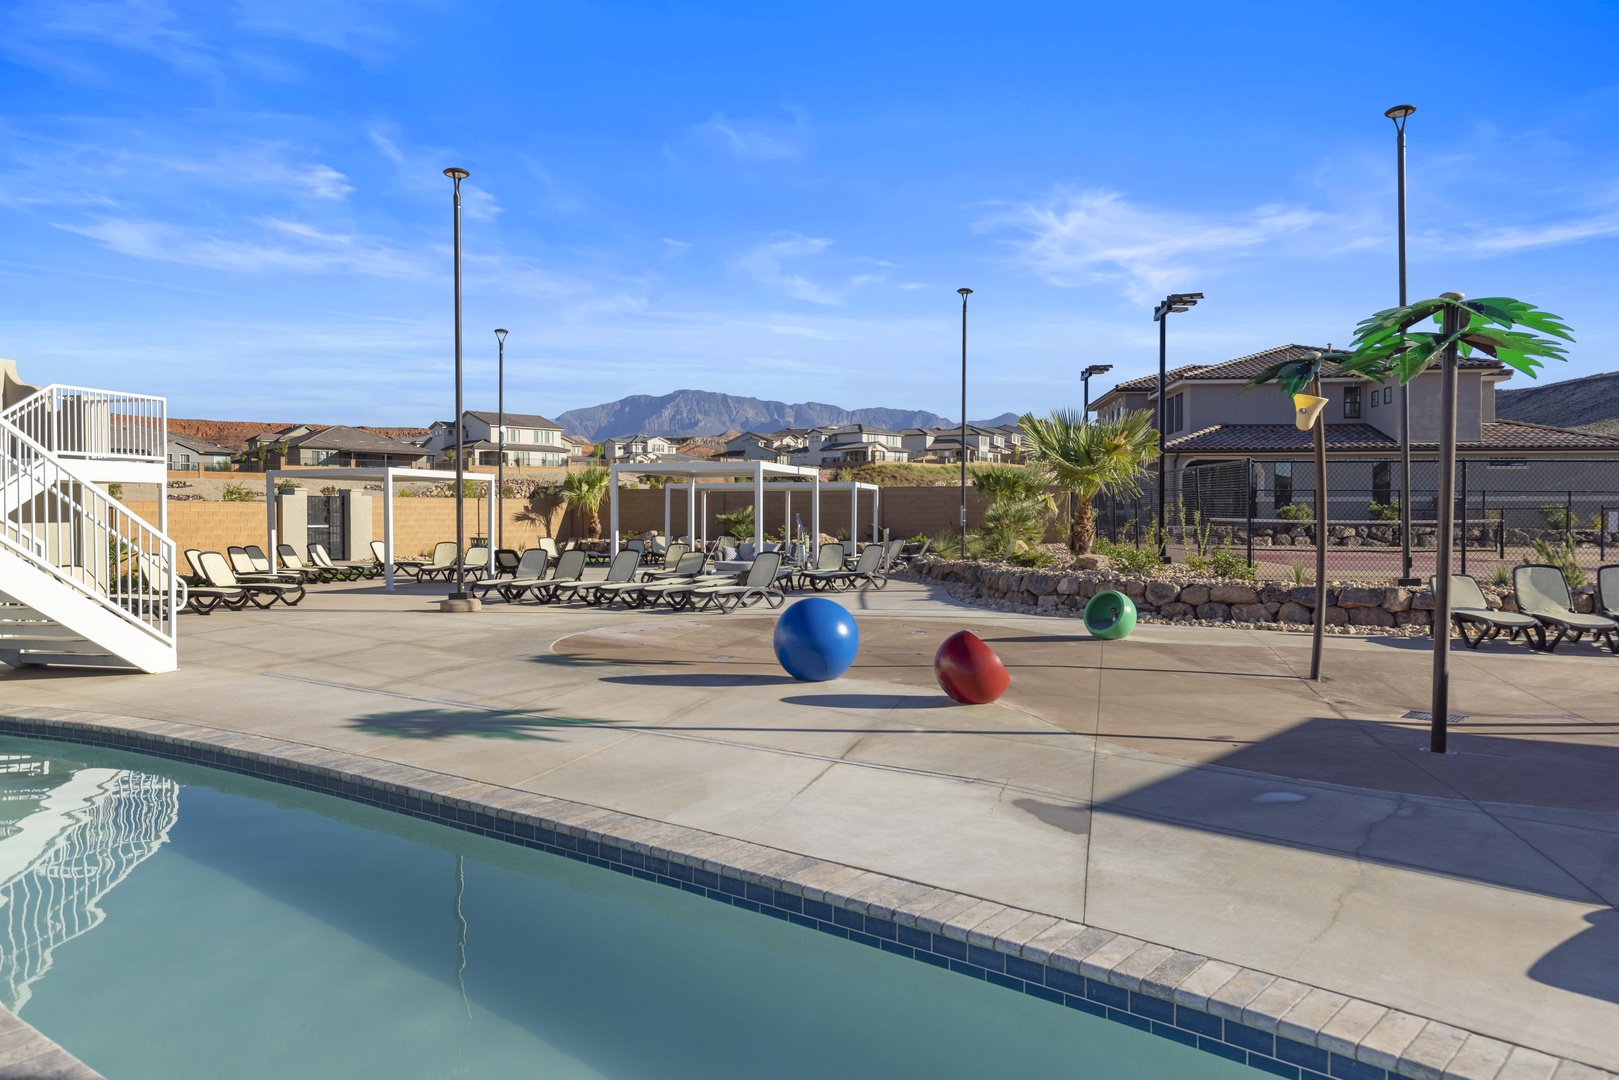 Splash pad for your little ones to enjoy